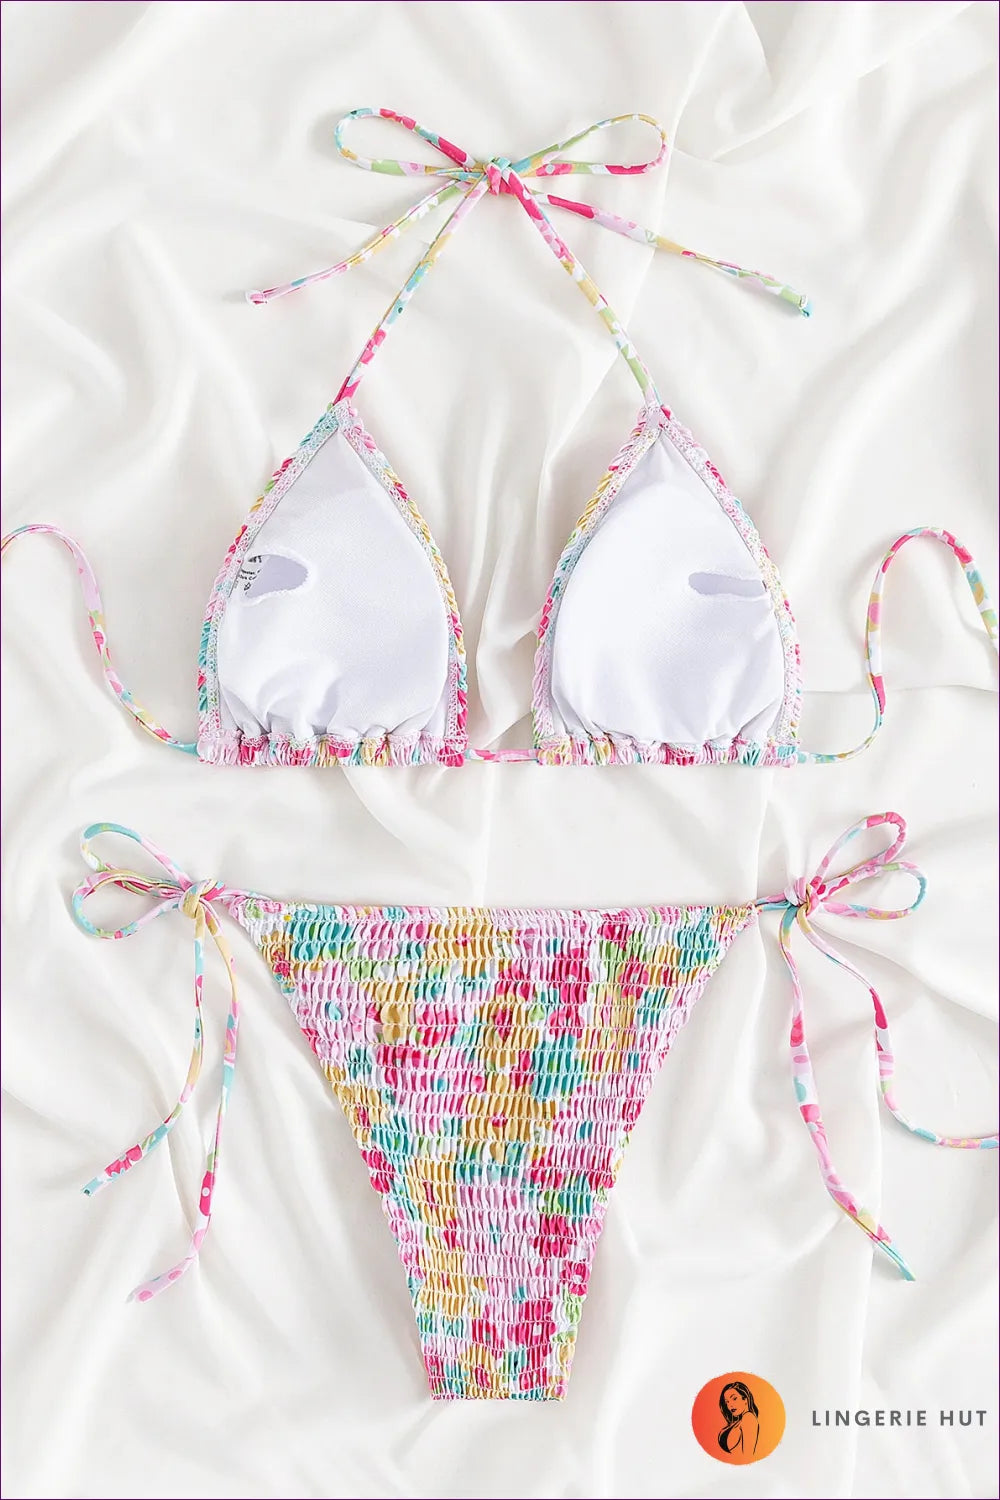 Turn Heads This Summer With Lingerie Hut’s Boho Chic Smocked Split Bikini. Limited Edition, Curve-enhancing,